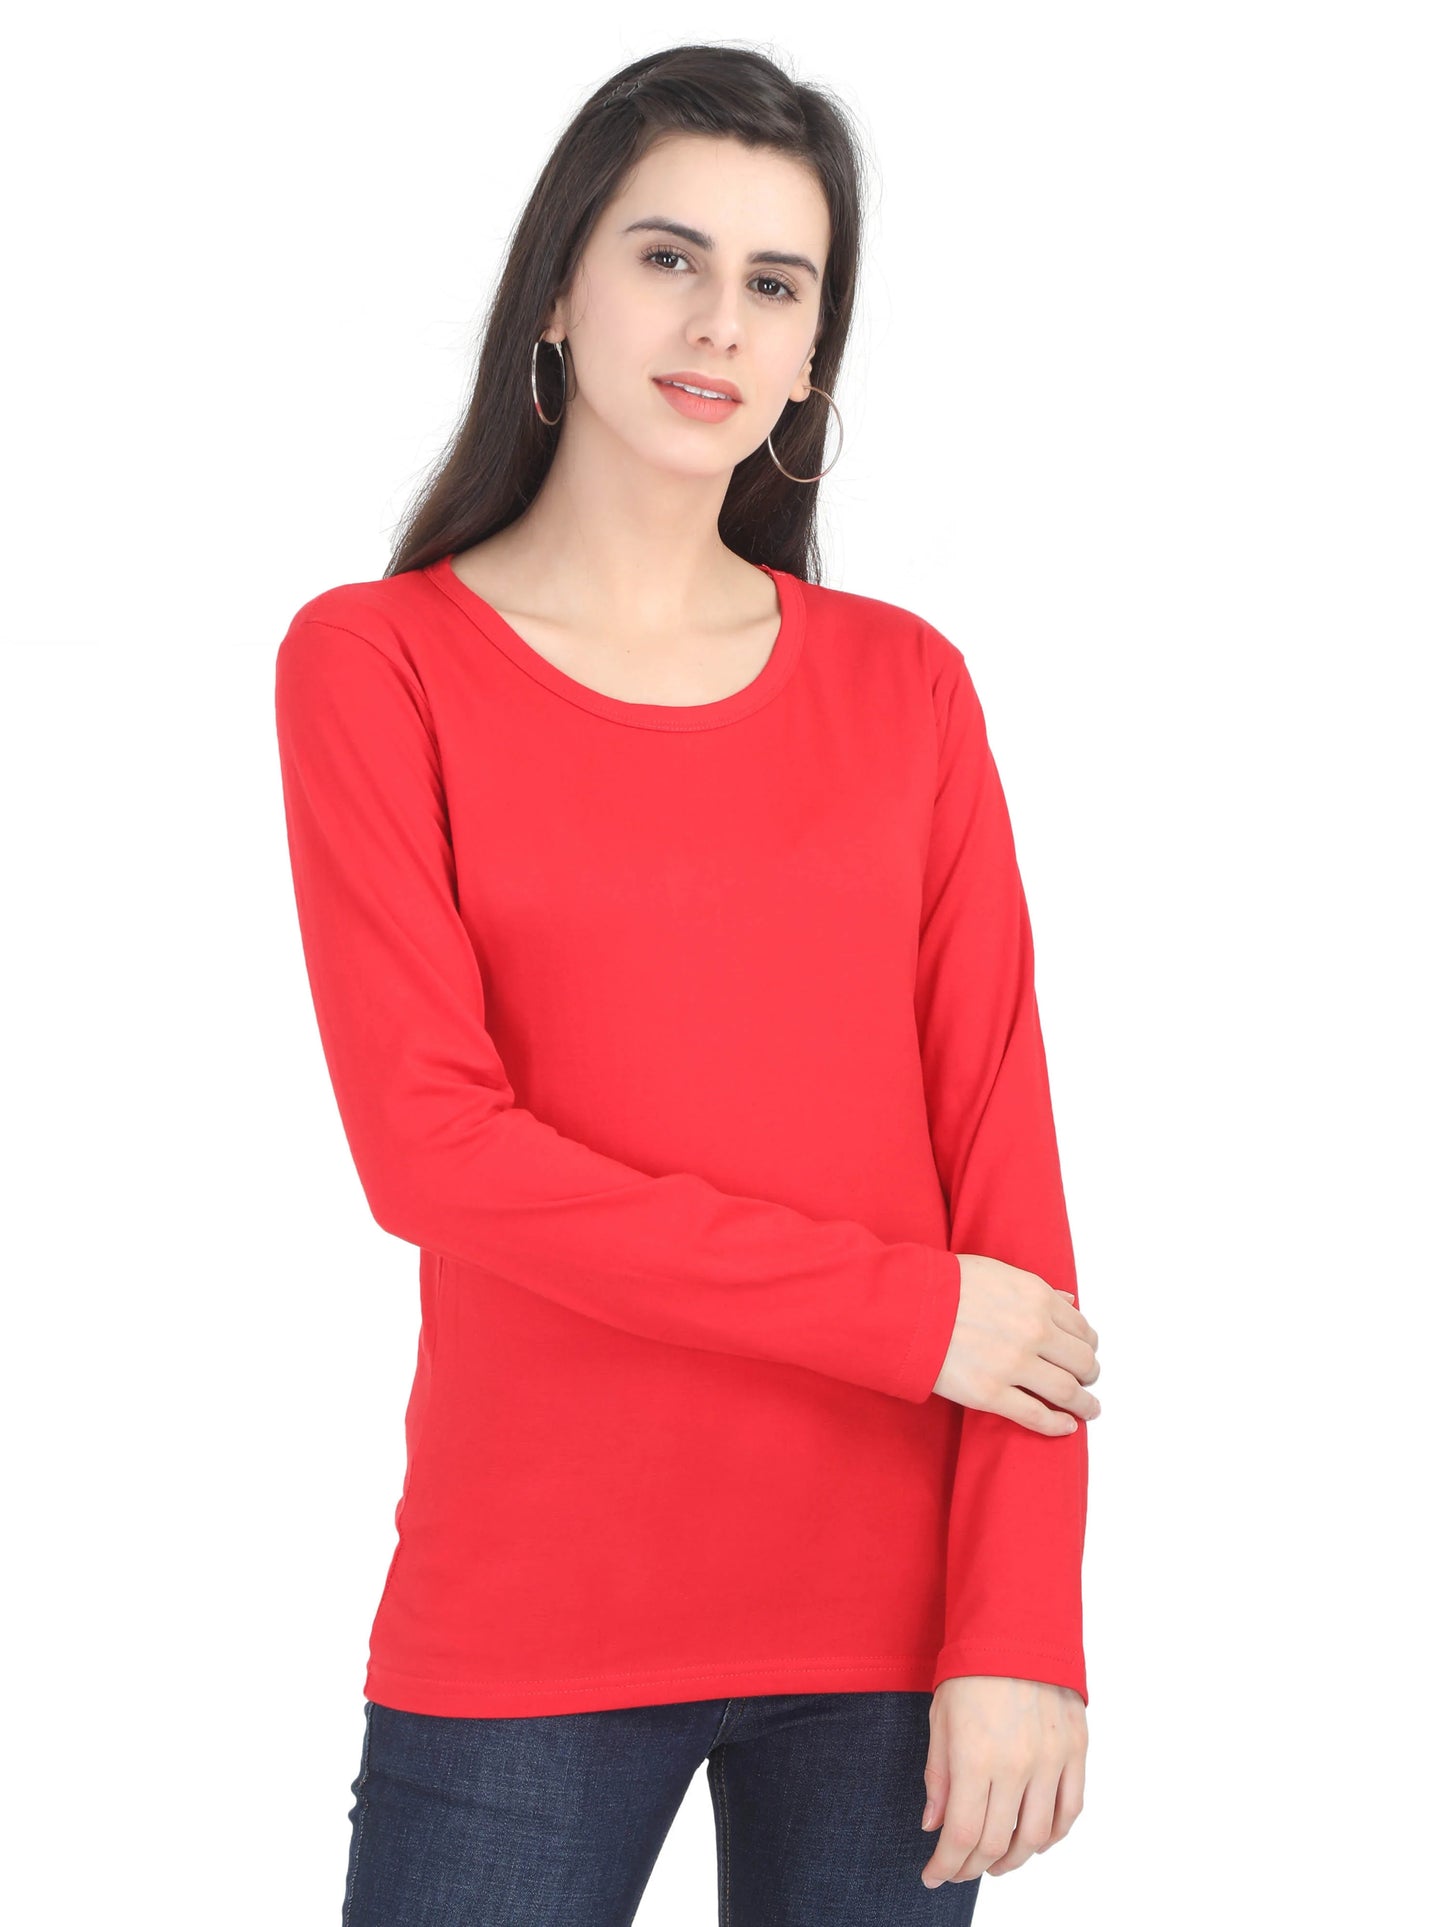 Women's Cotton Plain Round Neck Full Sleeve Red Color T-Shirt